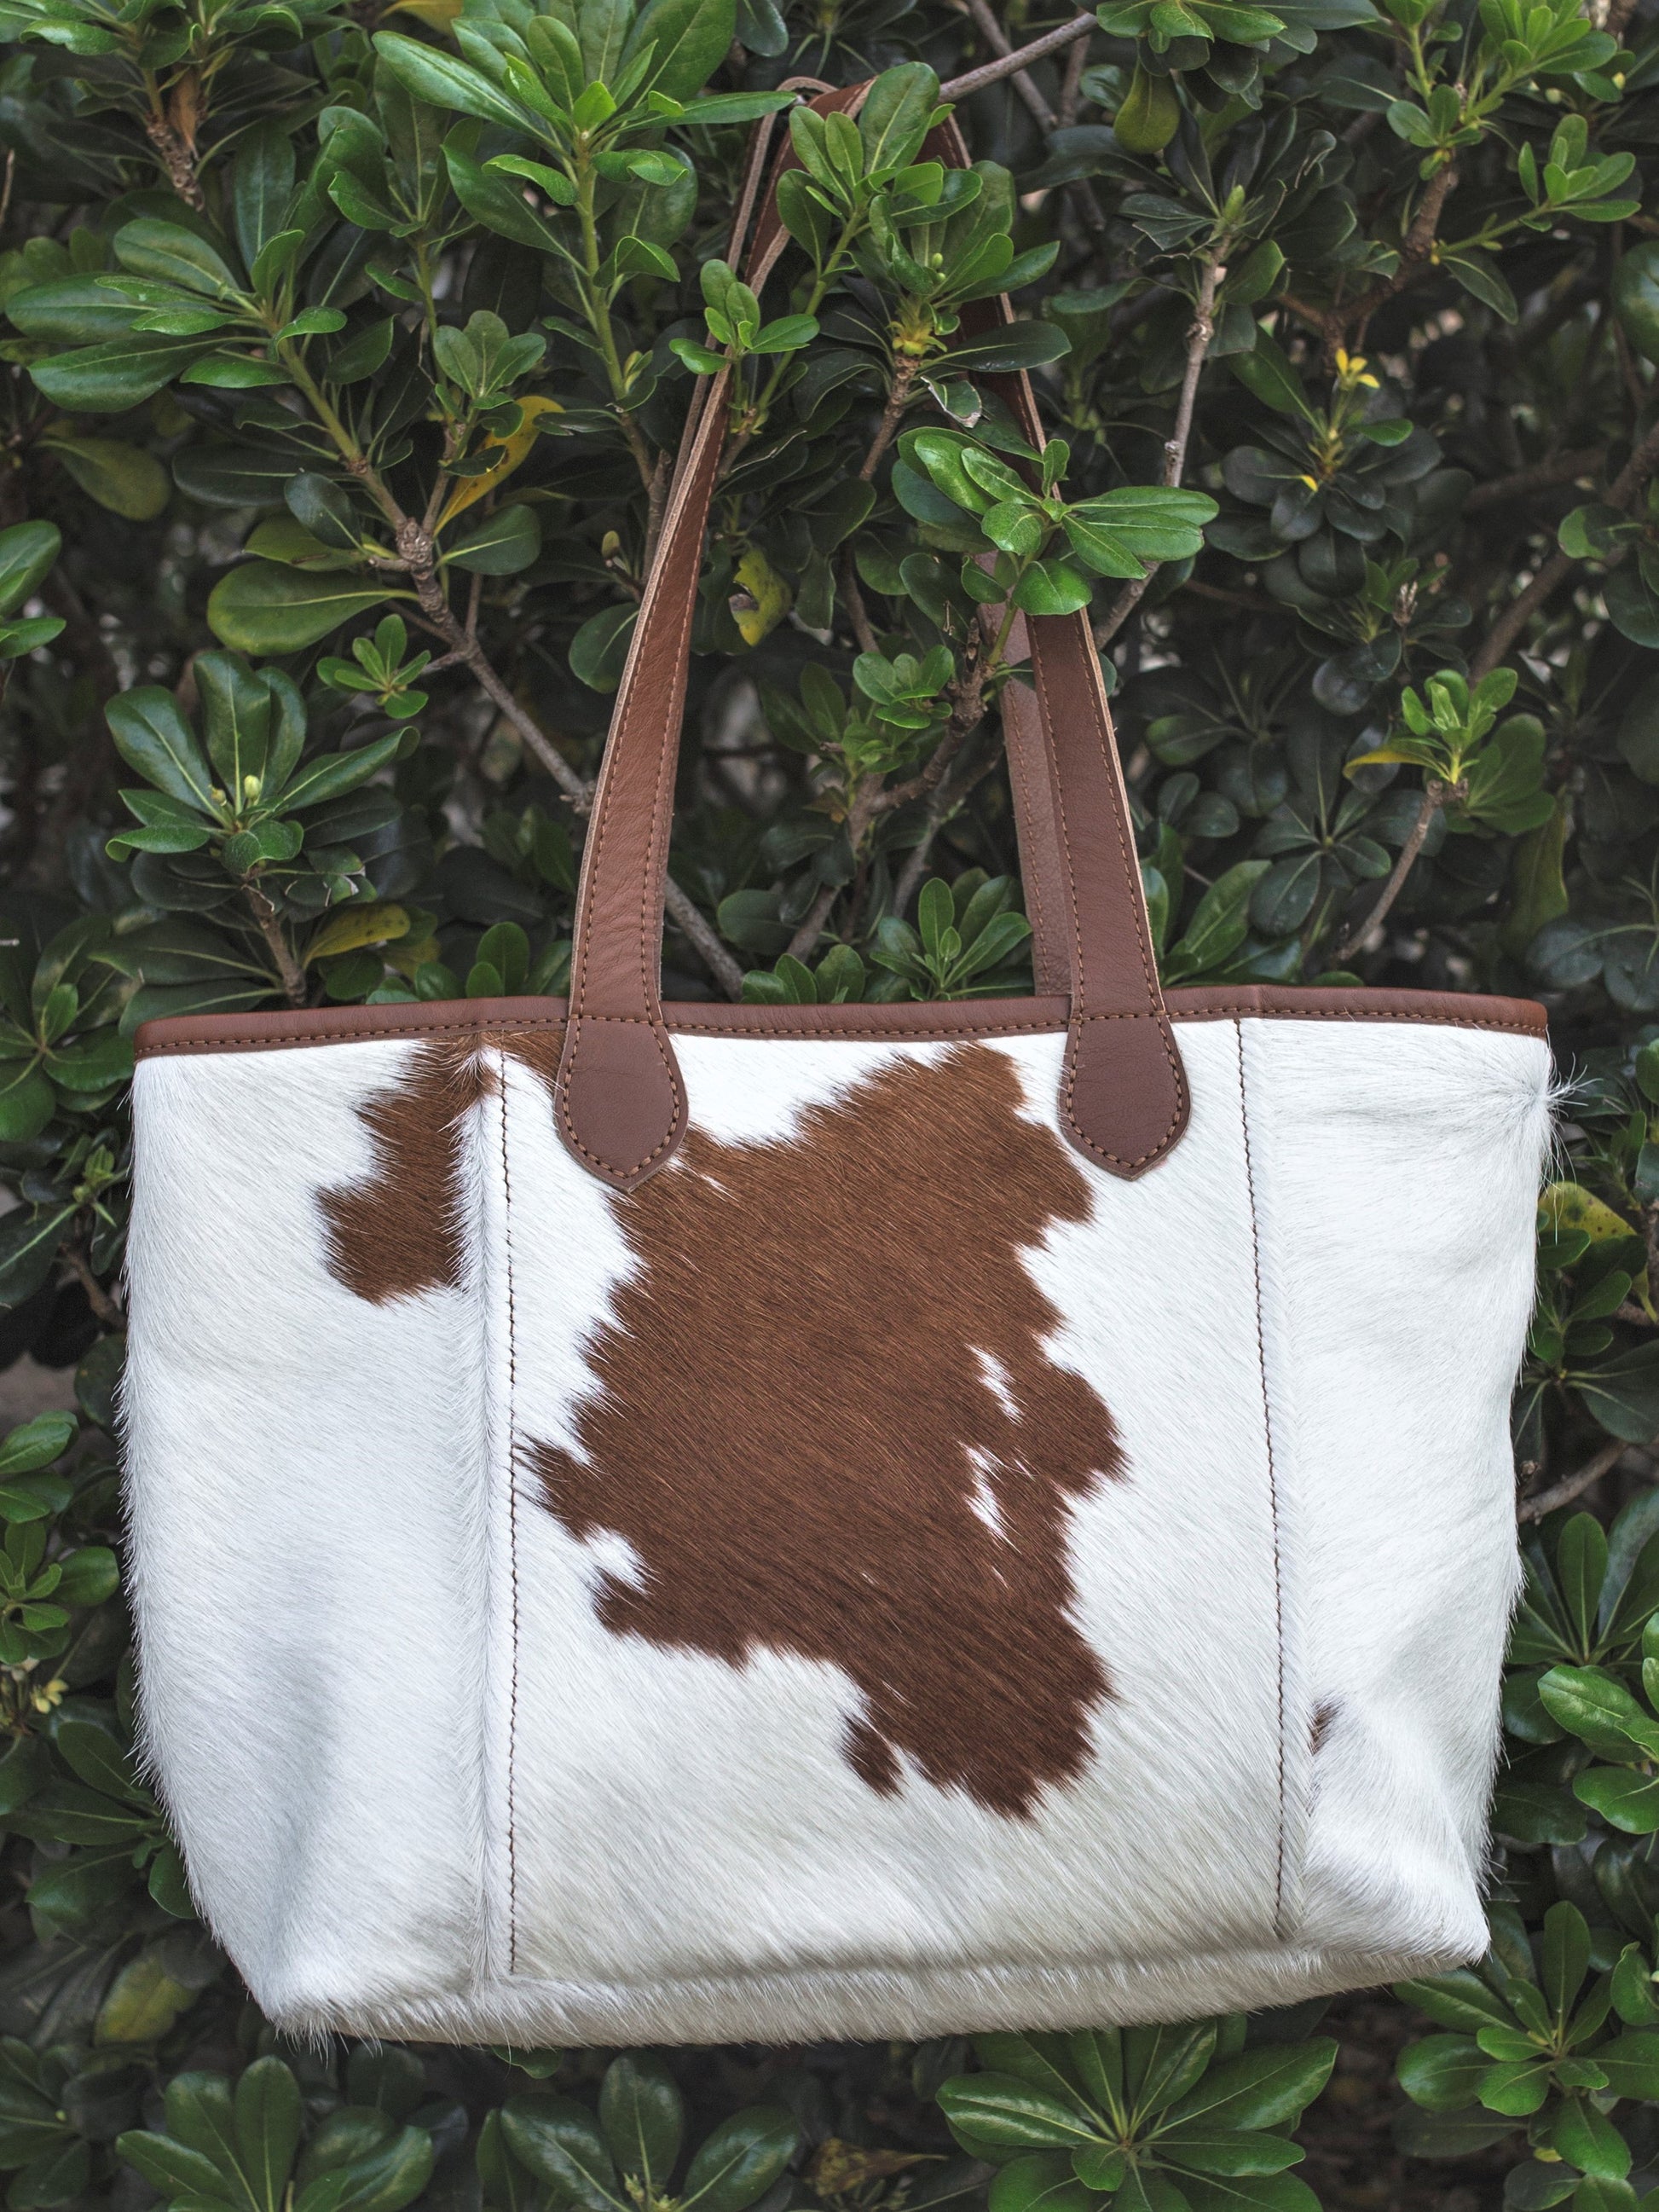 The Grocery Getter Tote - Cowhide or Leather